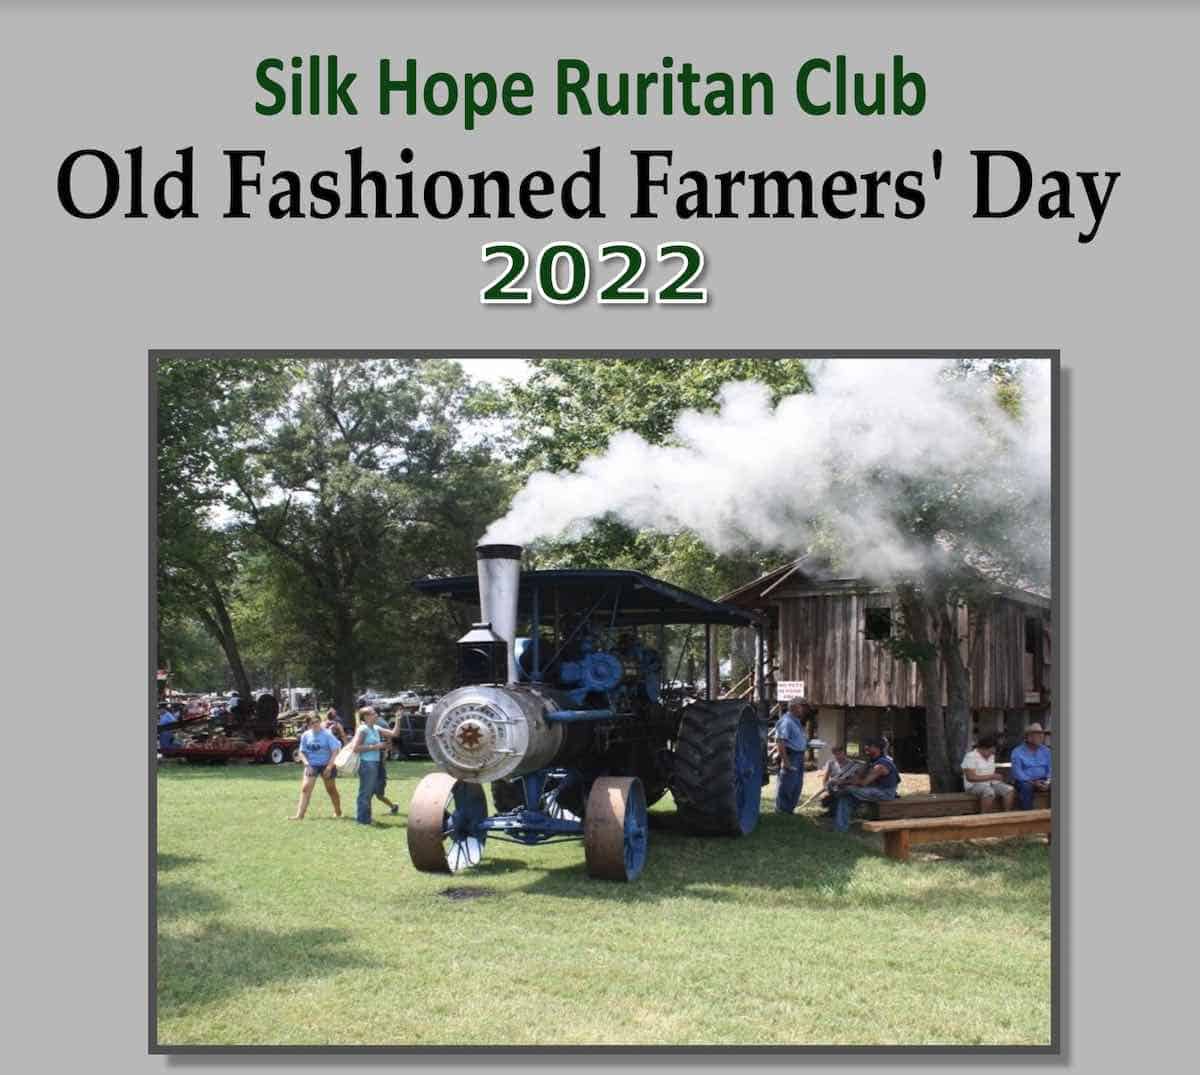 OldFashioned Farmers' Days in Siler City Labor Day Weekend Triangle